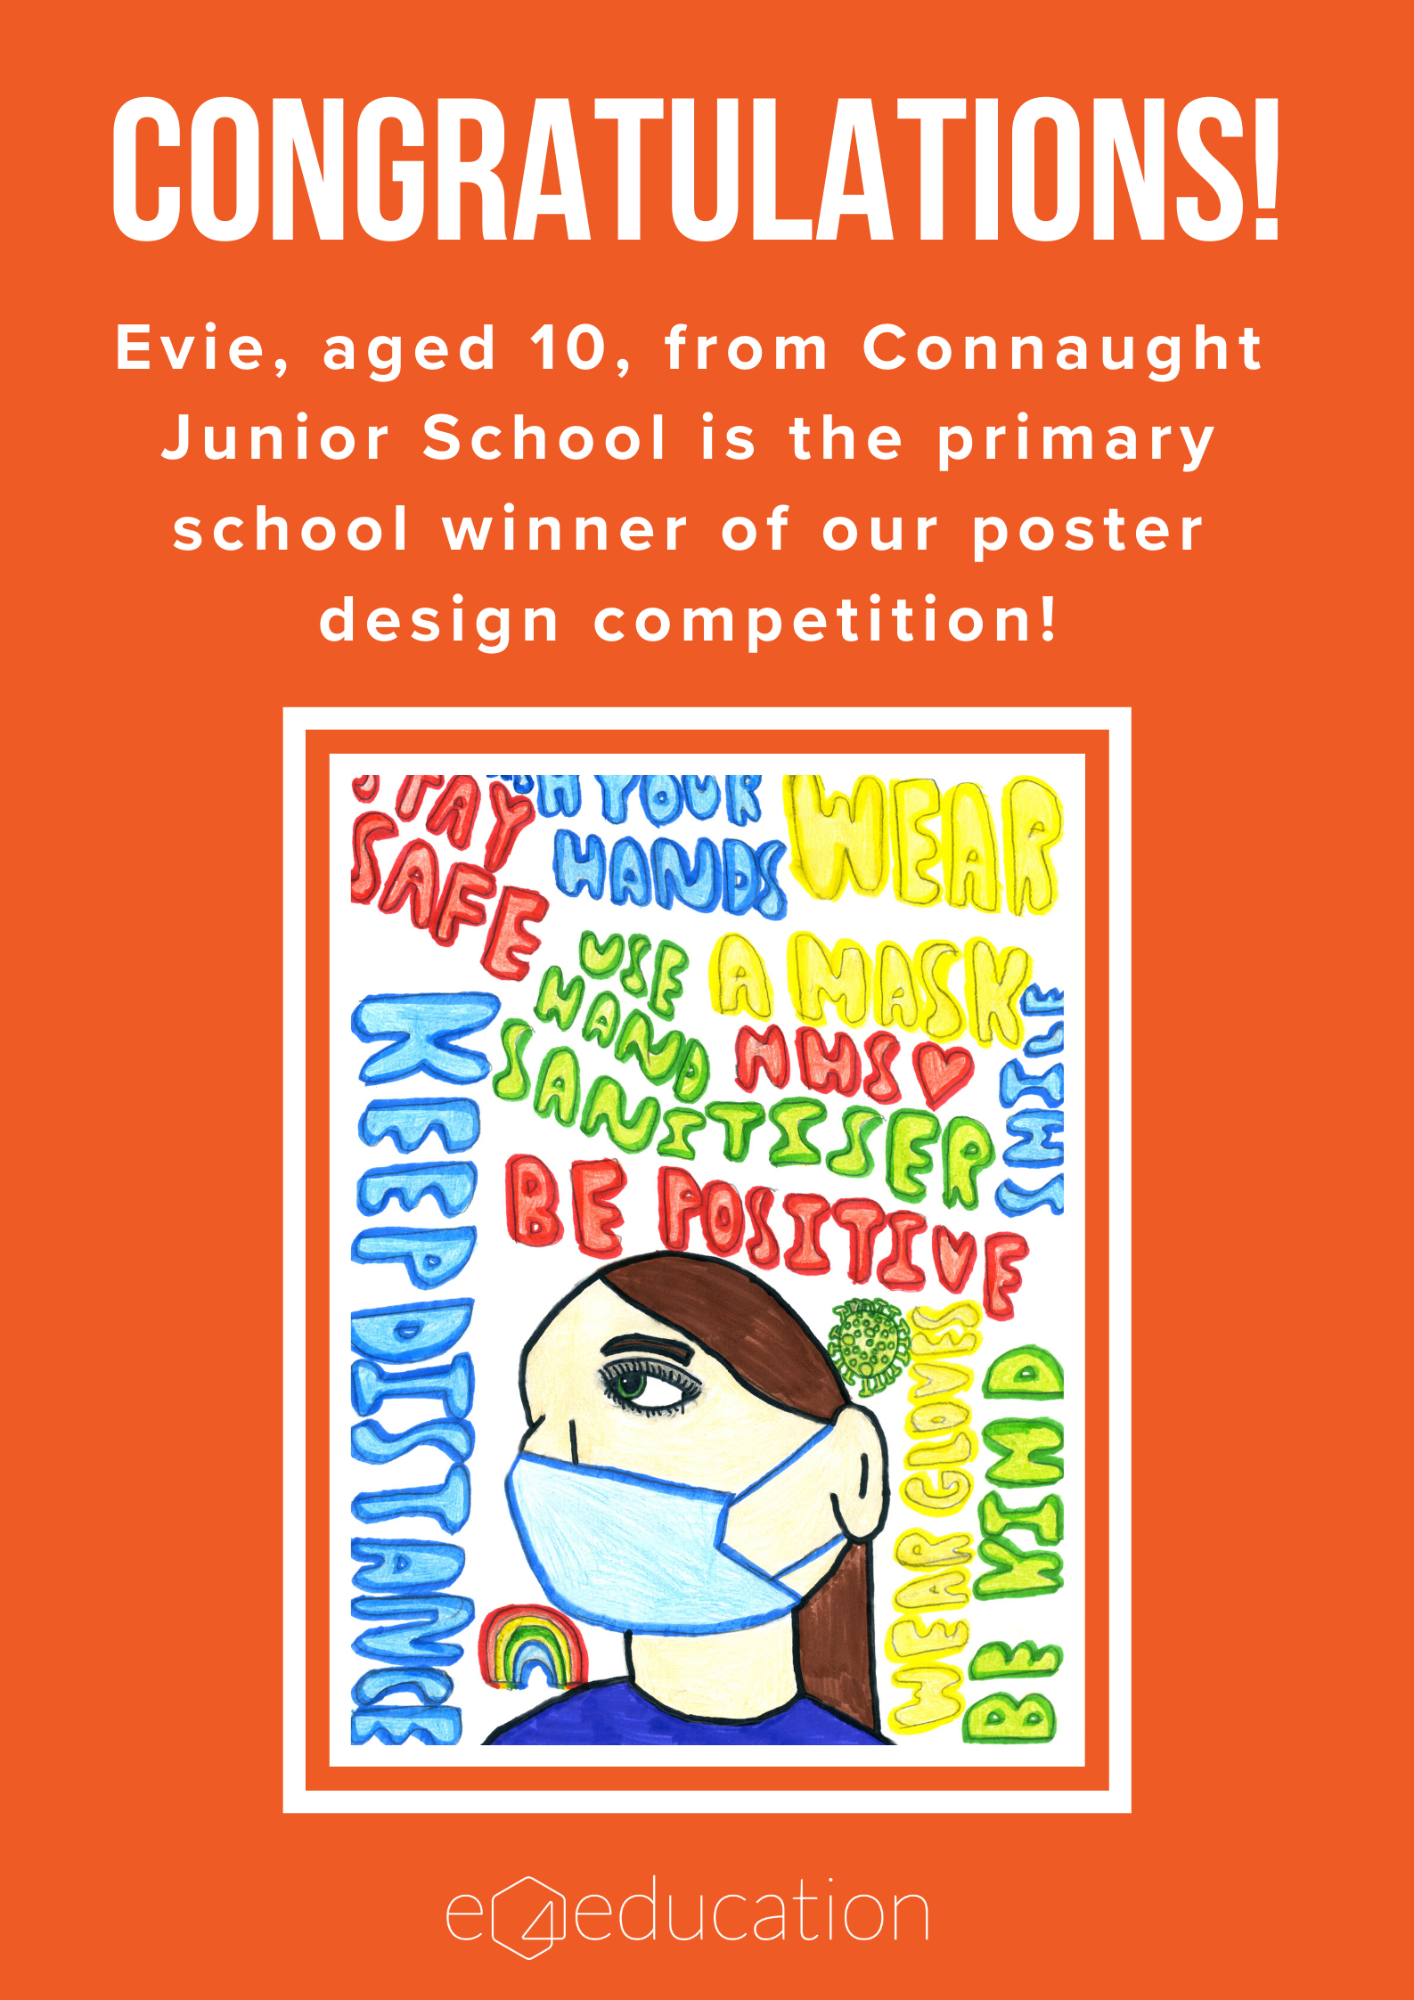 Primary poster competition winner - Evie aged 10